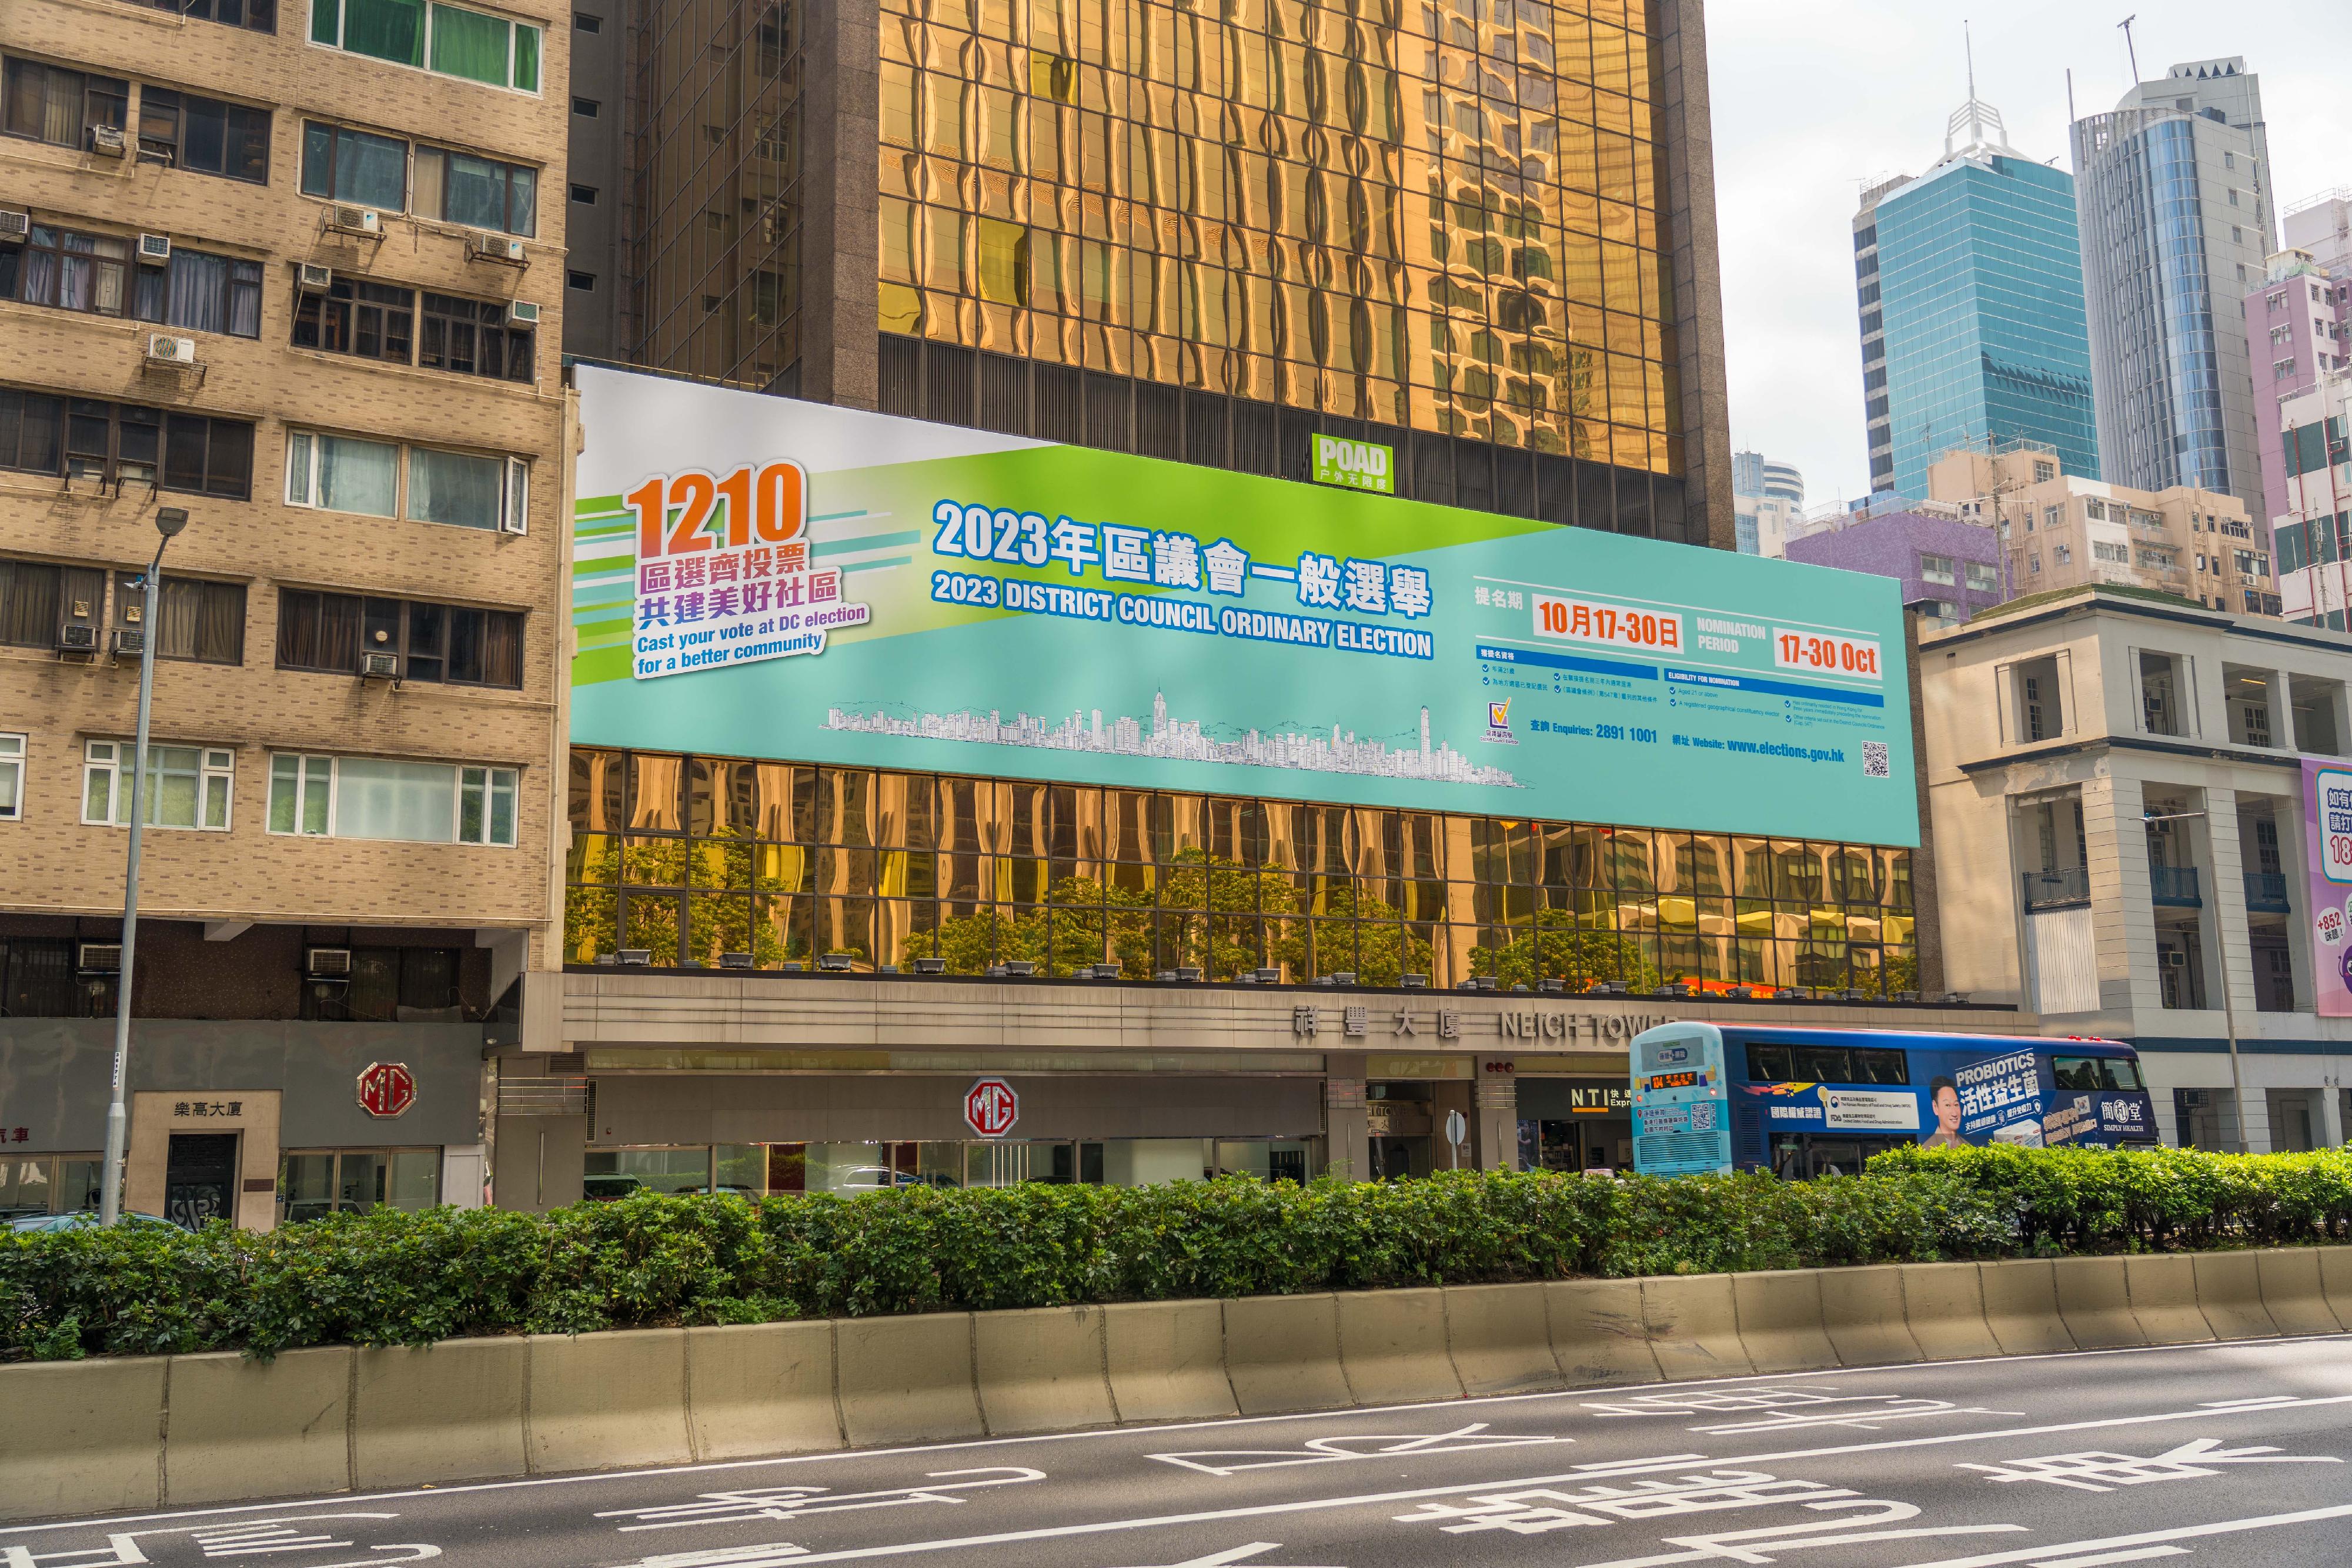 The 2023 District Council Ordinary Election will be held on December 10 (Sunday). The nomination period for the election will run from today (October 17) to October 30. The Government has launched a publicity campaign for the nomination period that includes displays of giant banners in different districts.